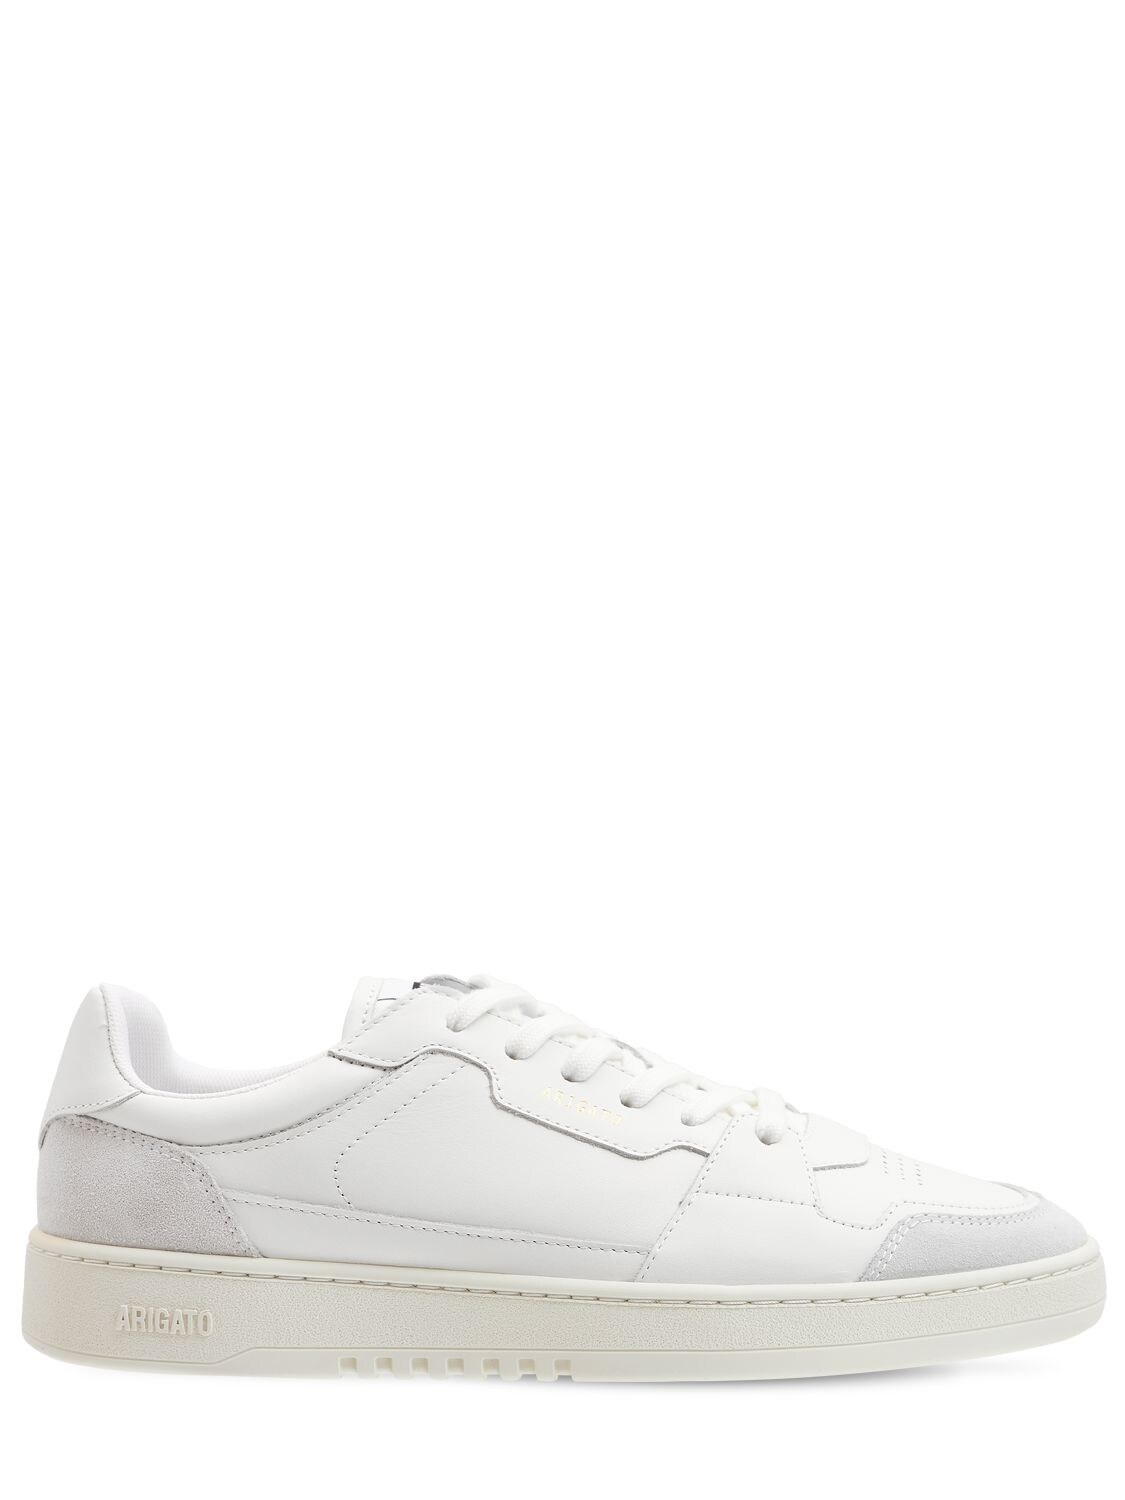 Dice Low Leather Sneakers